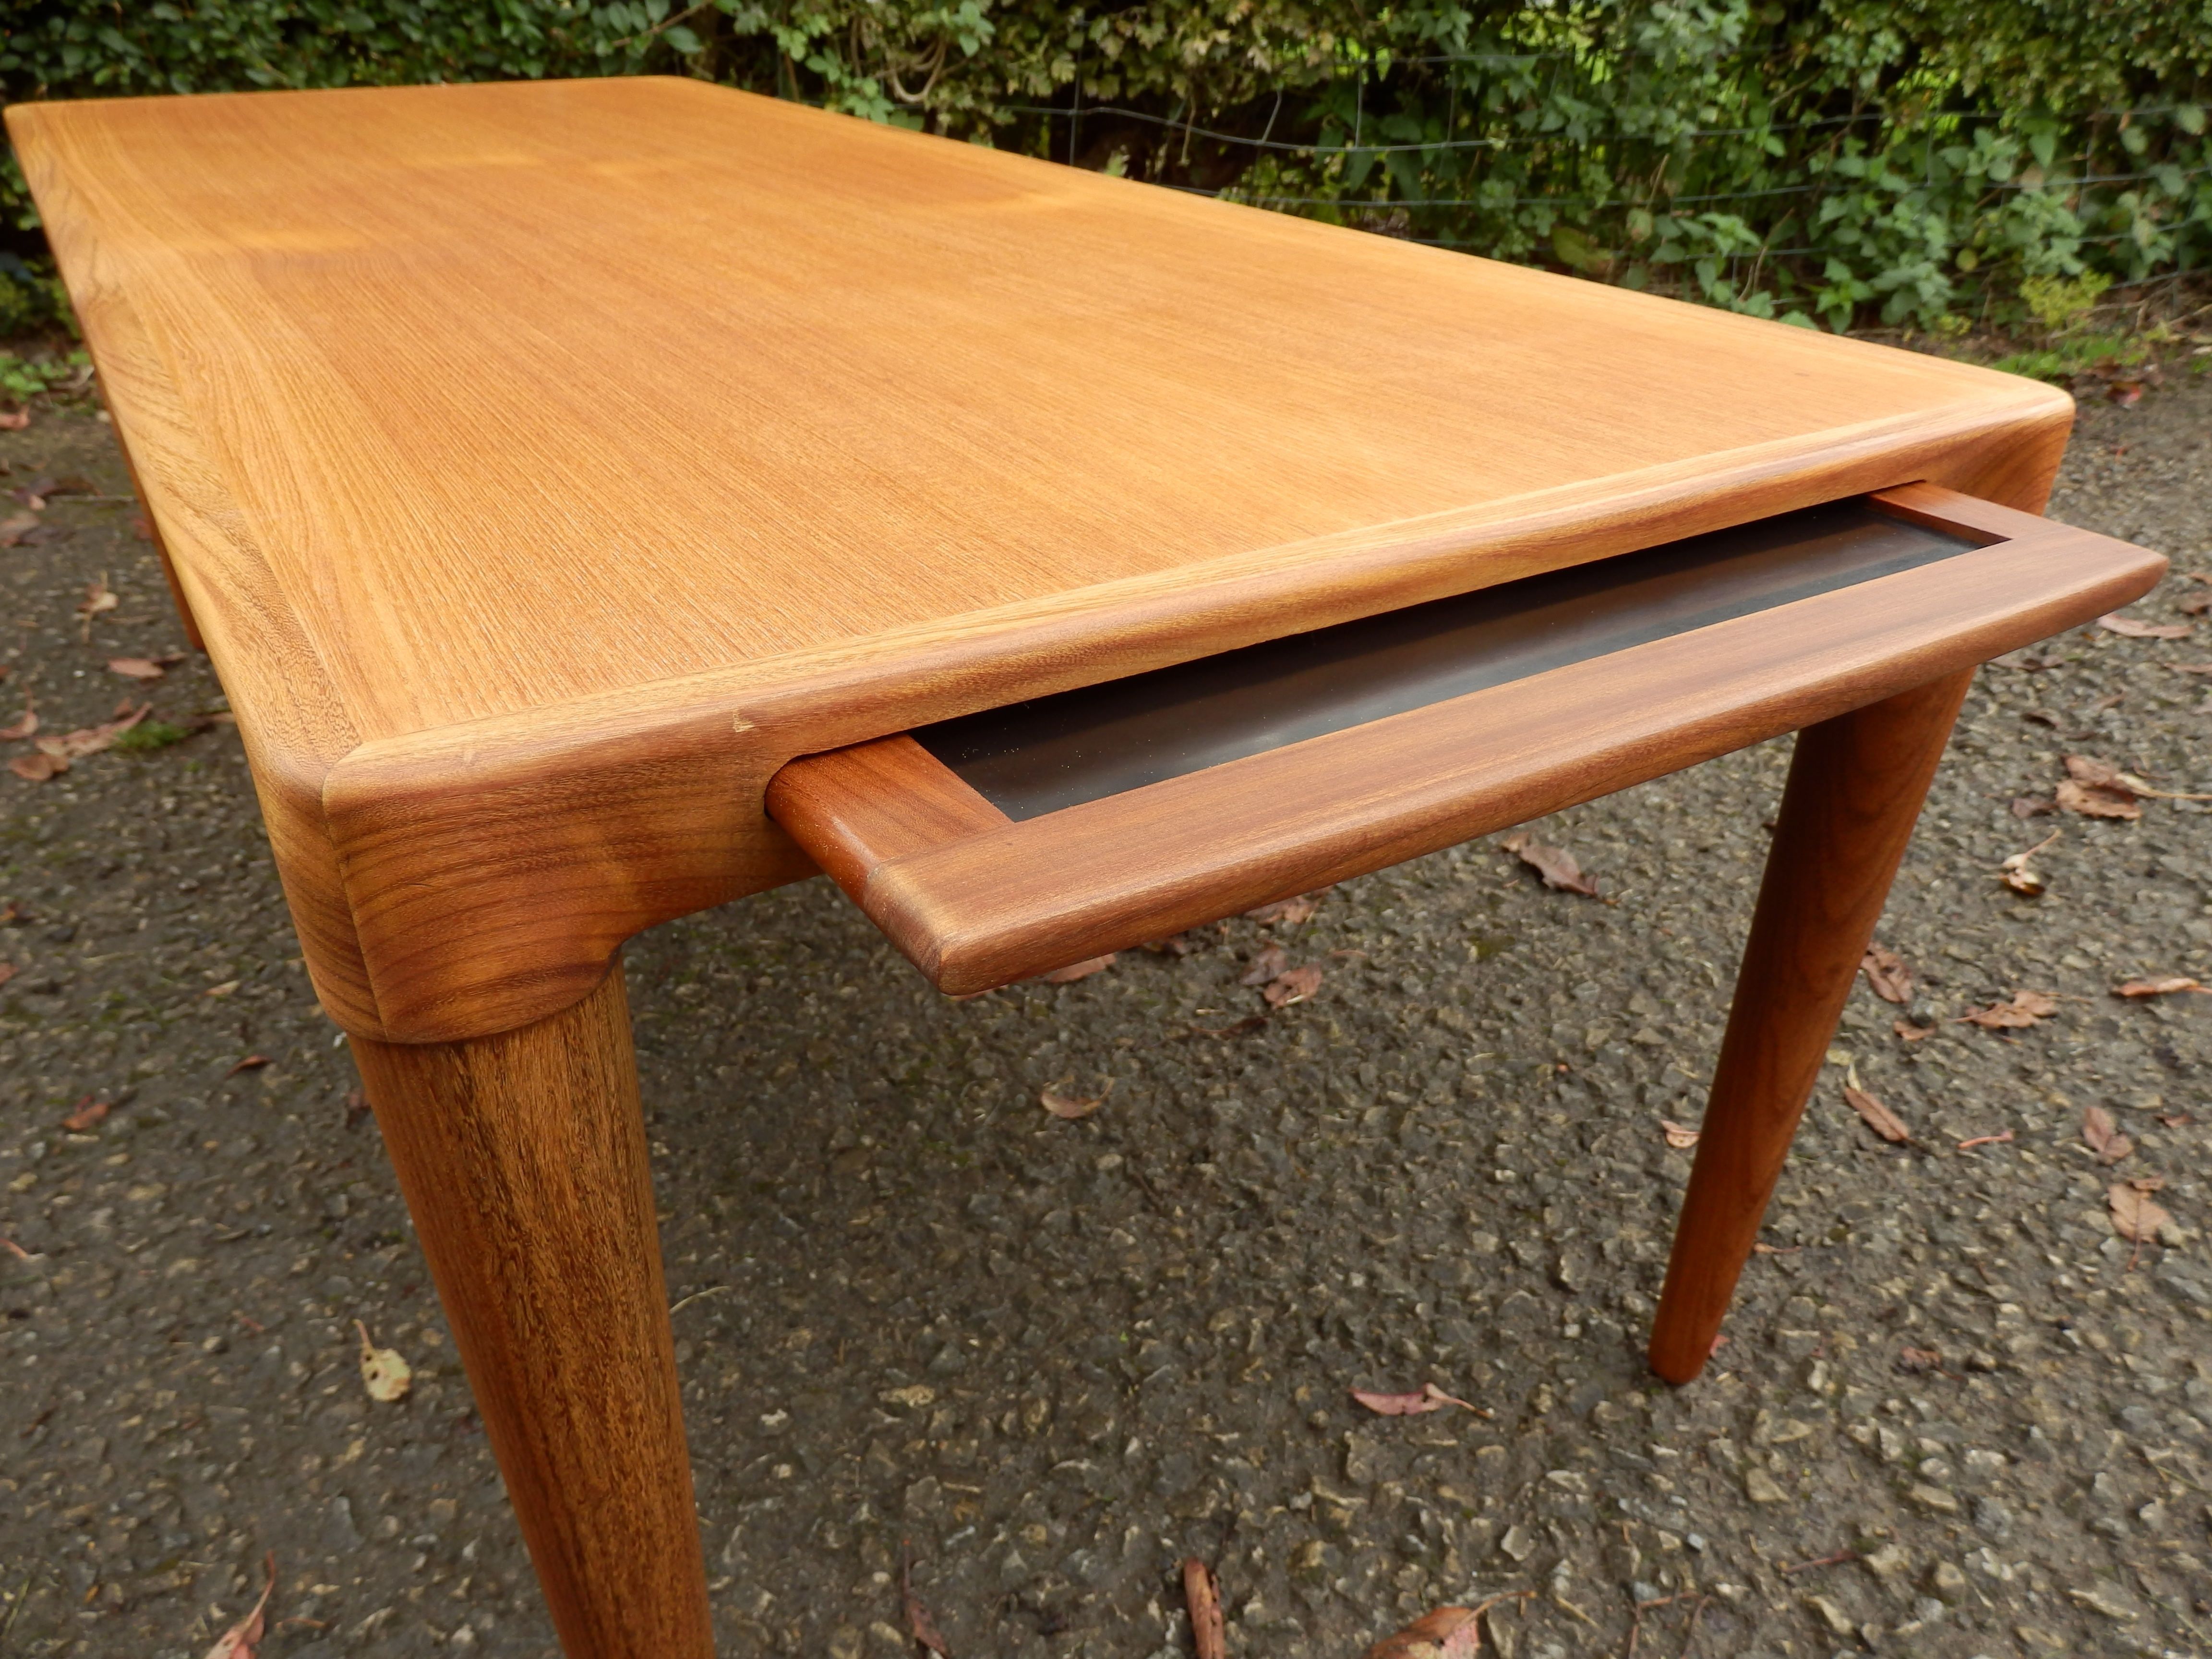 Very Rare Large Teak Coffee Table With Slide Out Drinks Tray Regarding Large Teak Coffee Tables (View 5 of 30)